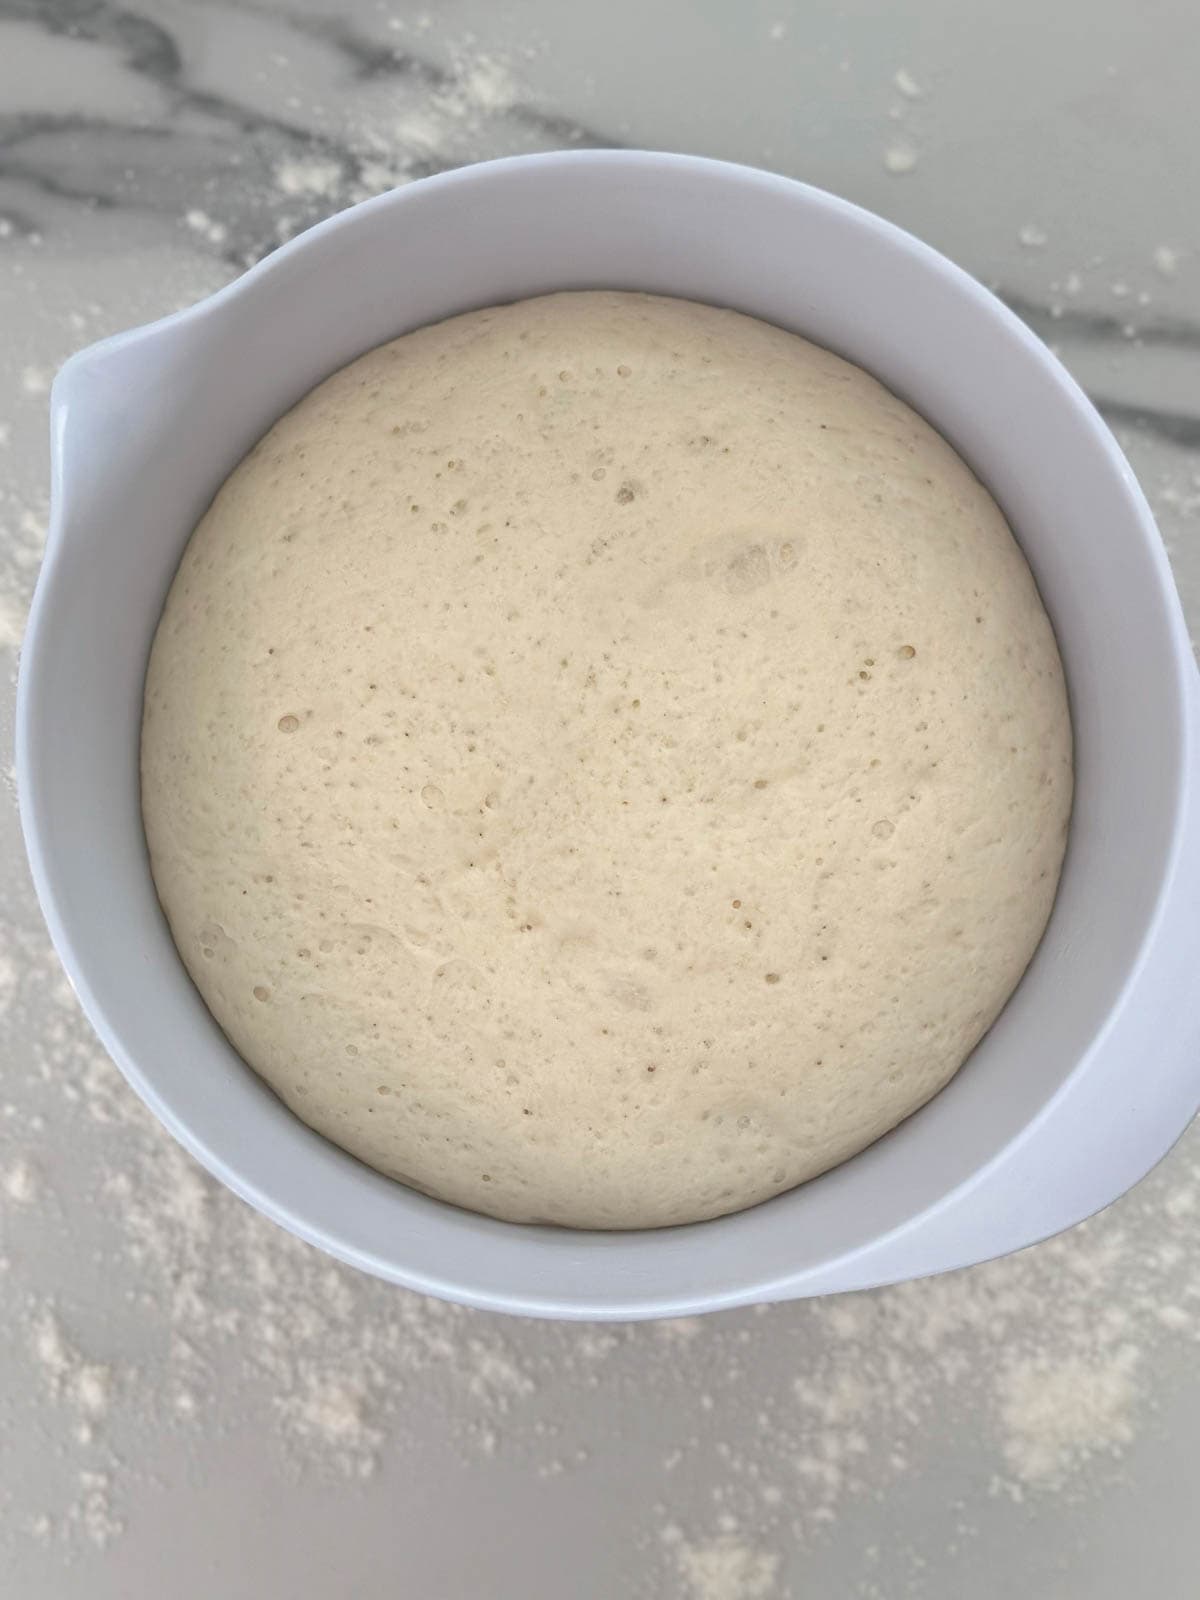 Thermomix dough in a bowl after proofing. 